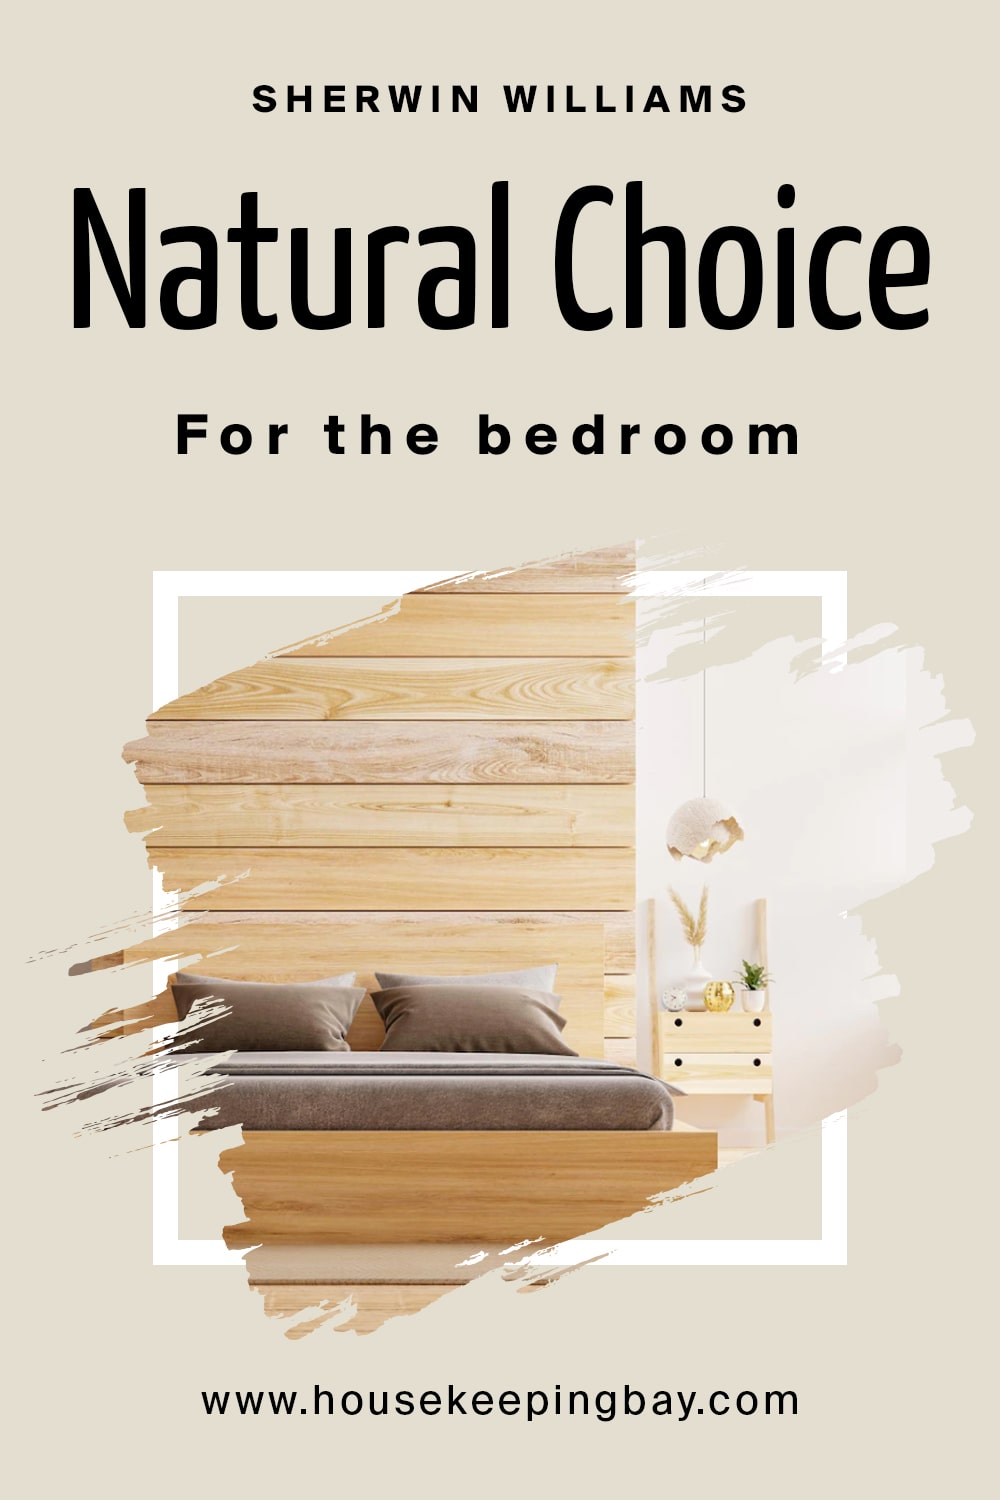 Sherwin Williams. Natural Choice For the bedroom